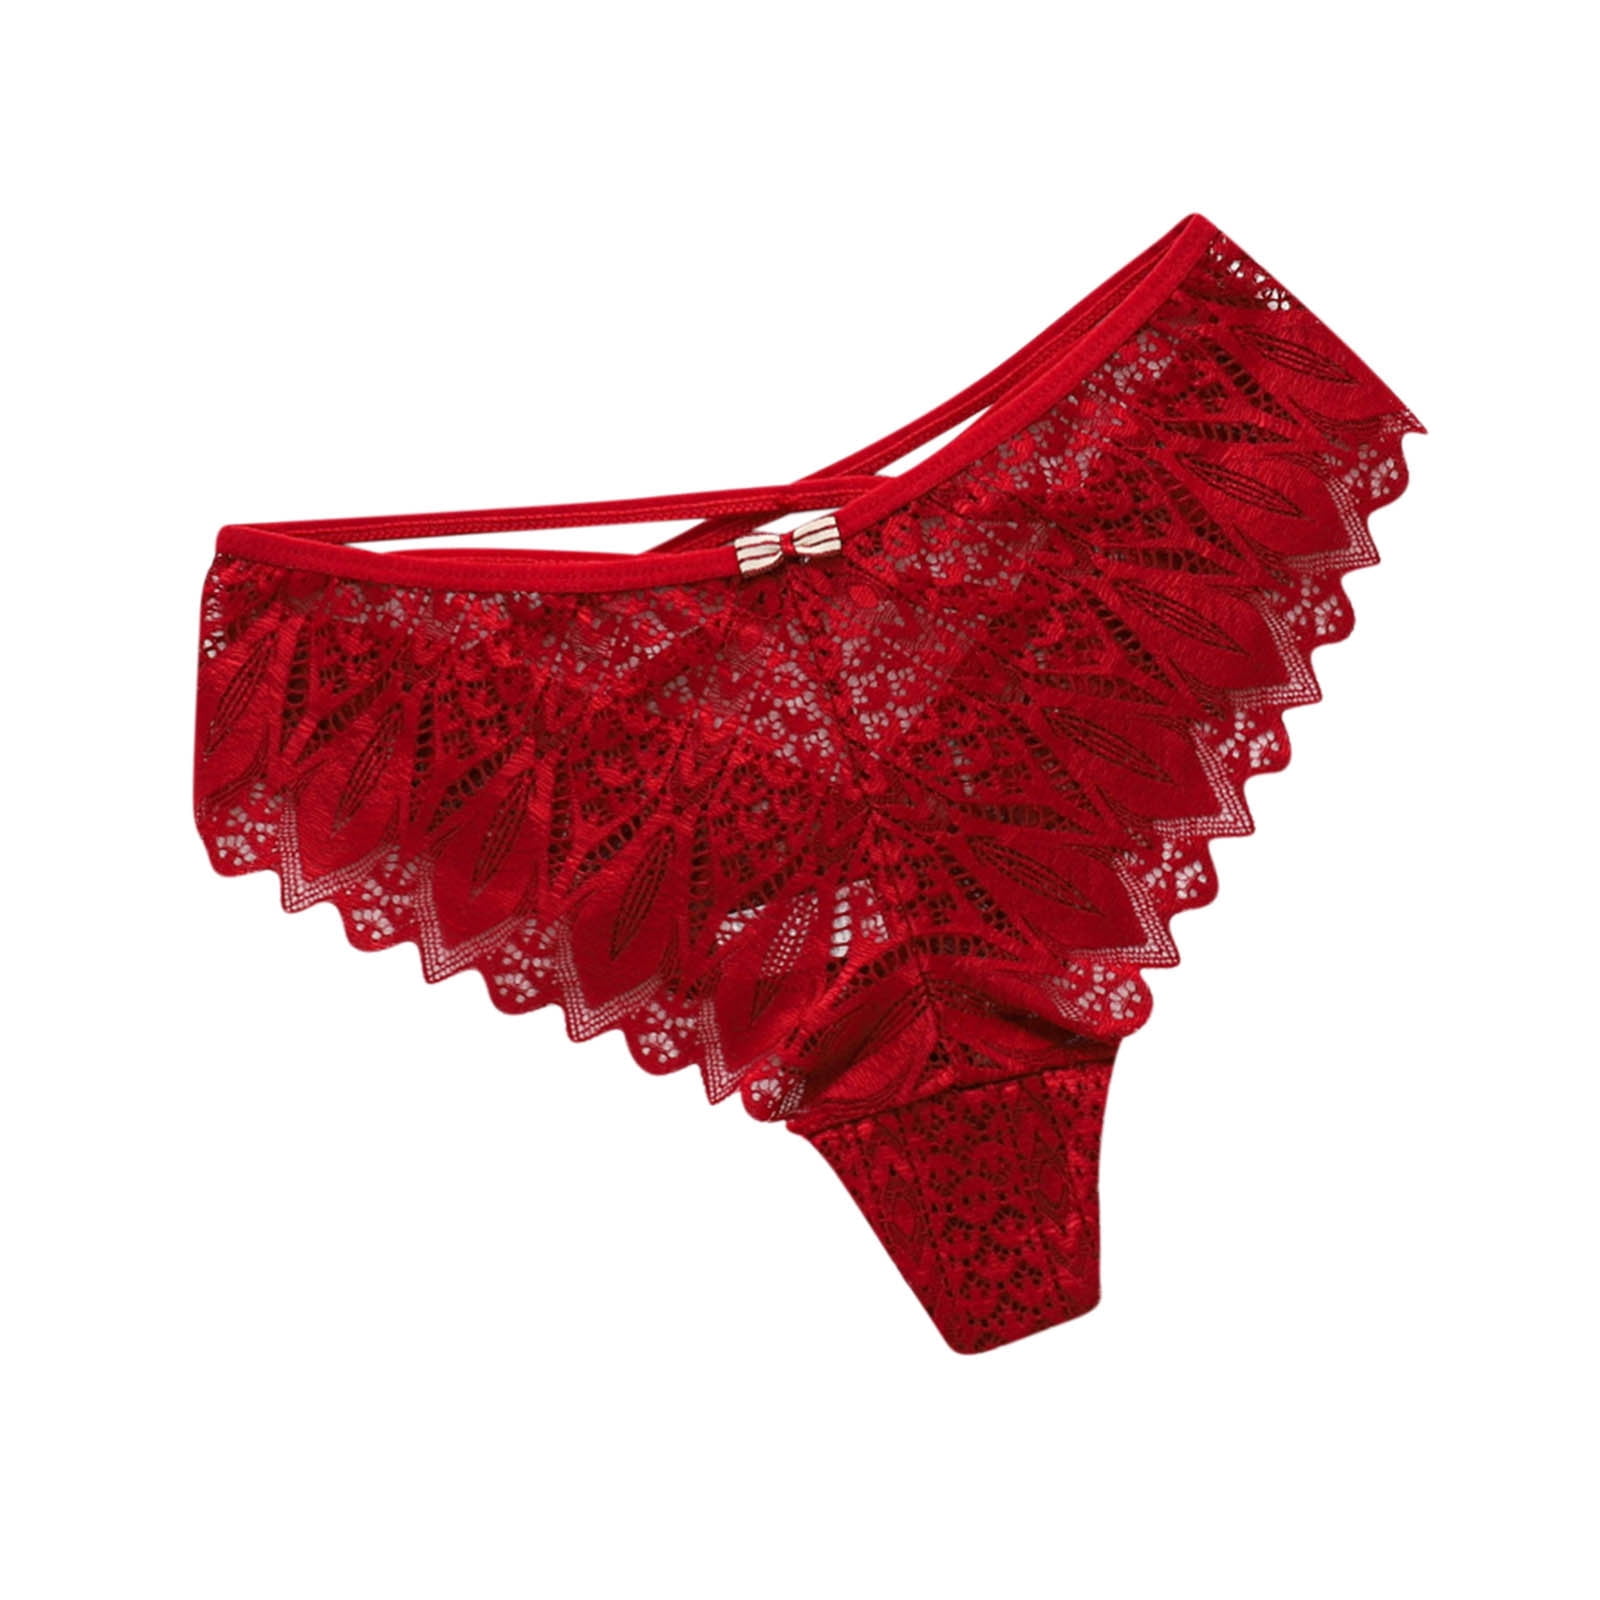 Buy Strawbella HOT Women Pantie Low Waist Transparent Panties Female Sexy  Underwear Intimates Briefs LACE Floral Thong Hollow Out Panty Red at